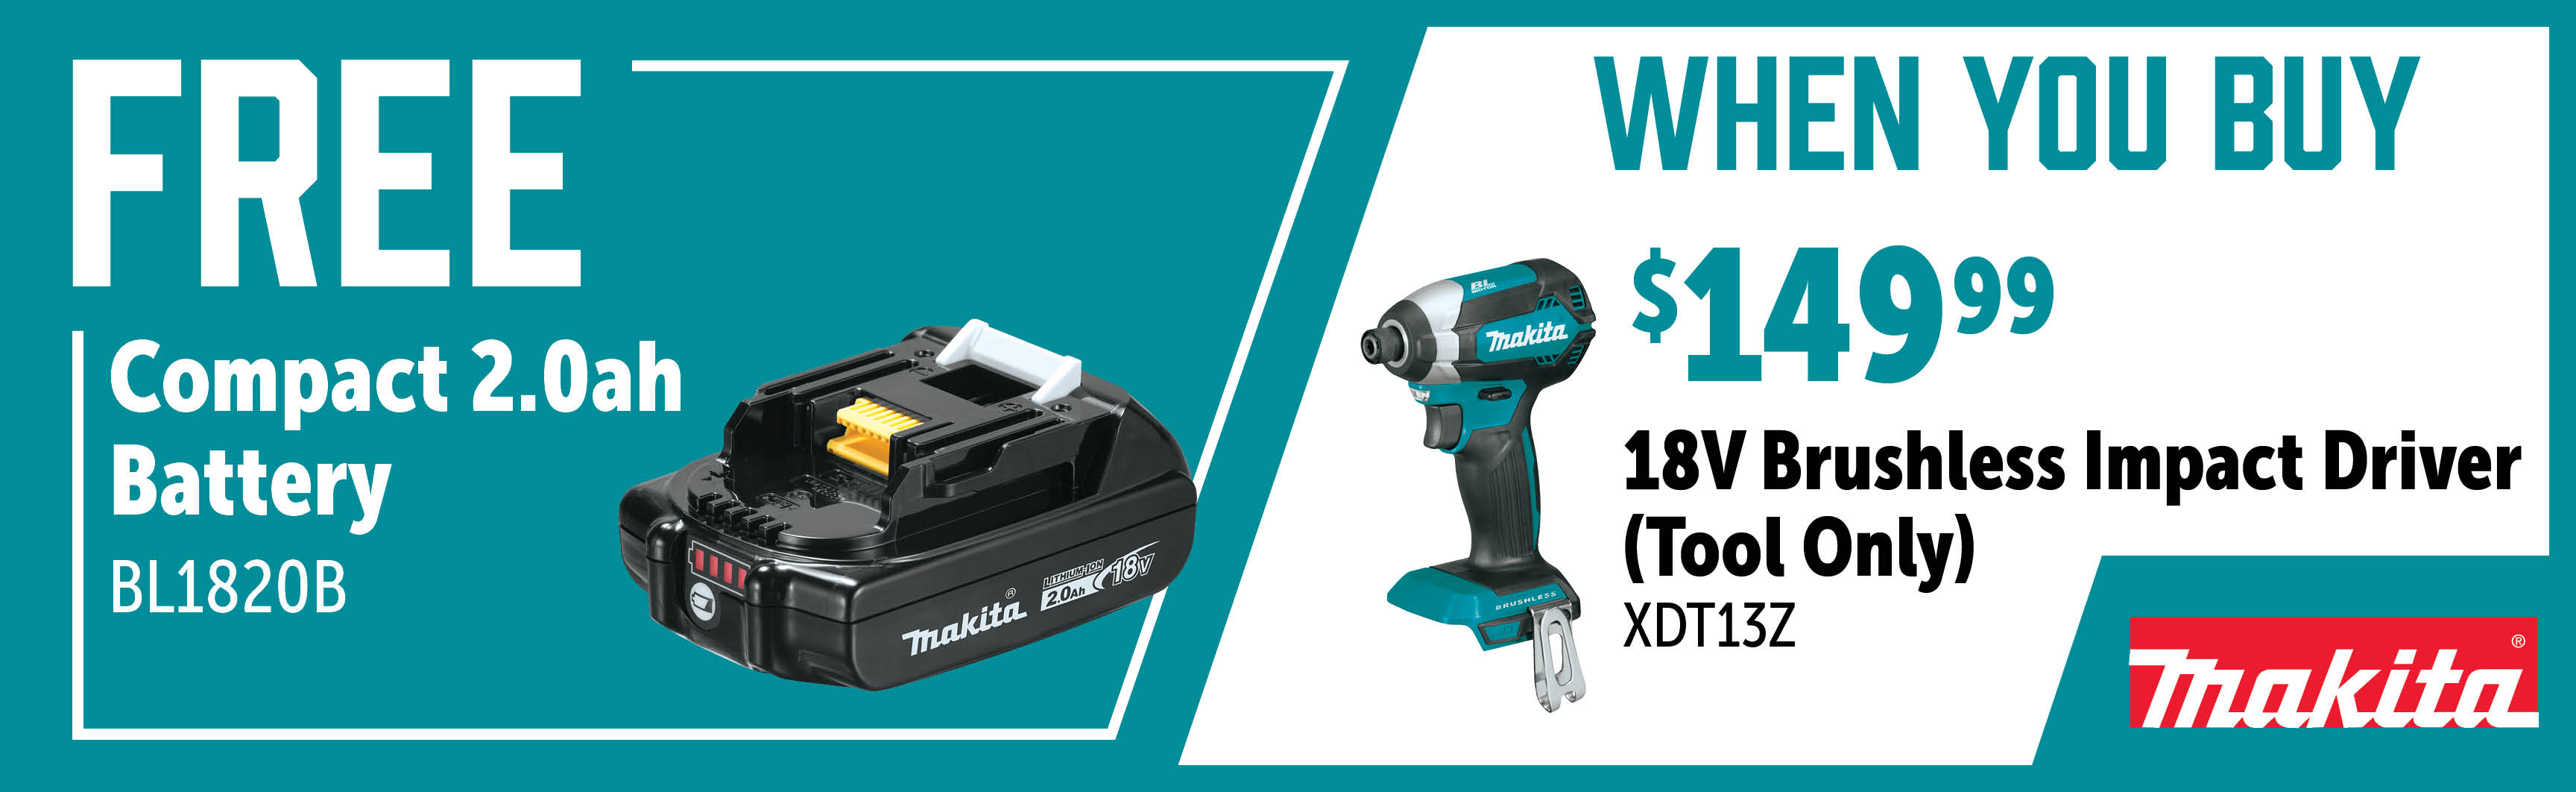 Makita Aug-Oct: Buy an XDT13Z and Get a Free BL1820B